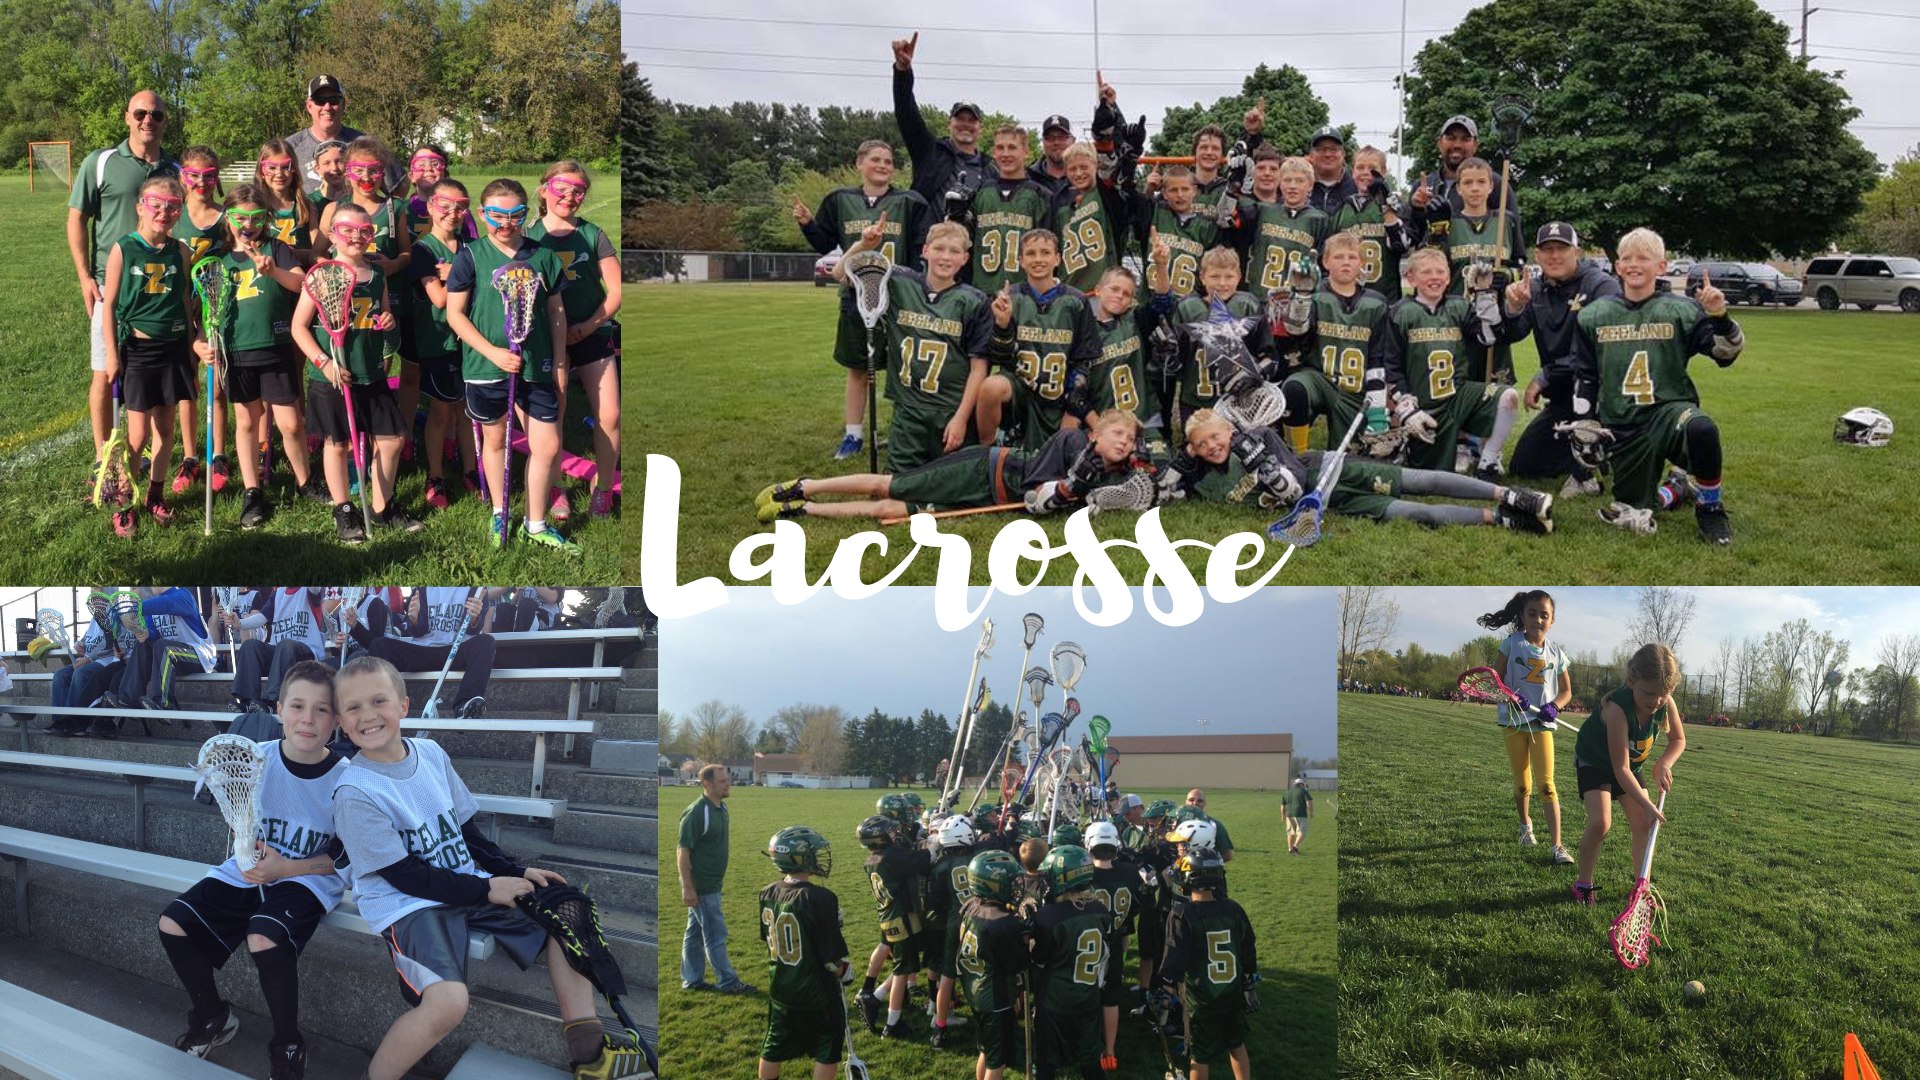 boys and girls playing lacrosse